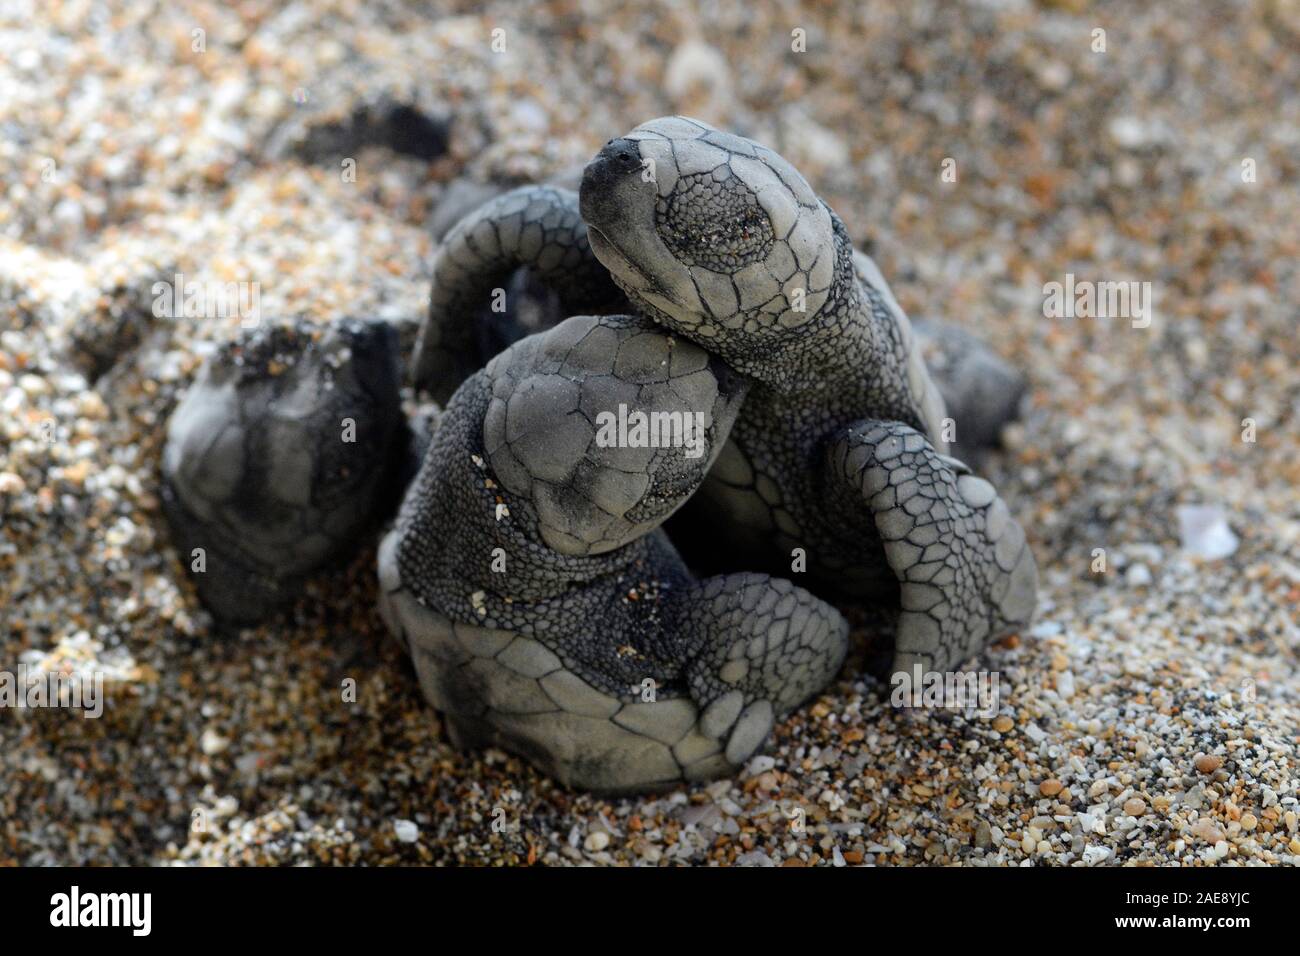 Green sea turtle, Chelonia mydas. Hatchling turtles struggle to reach the surface of the sand,  Bali, Indonesia. Stock Photo